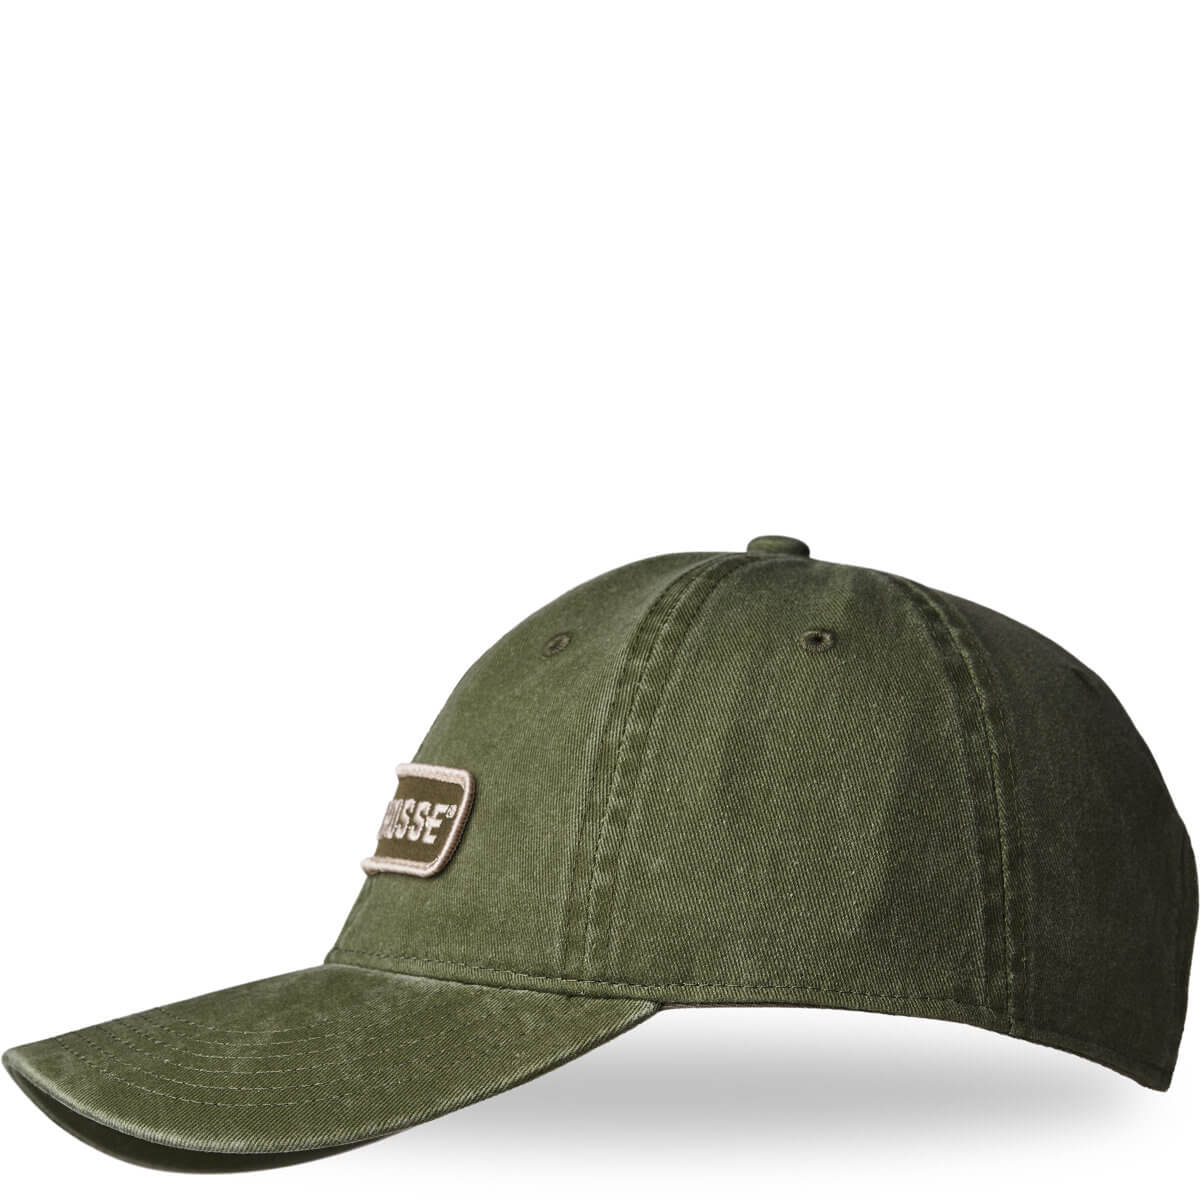 Danner LaCrosse Light Olive Embroidered Patch Hat 918567-3